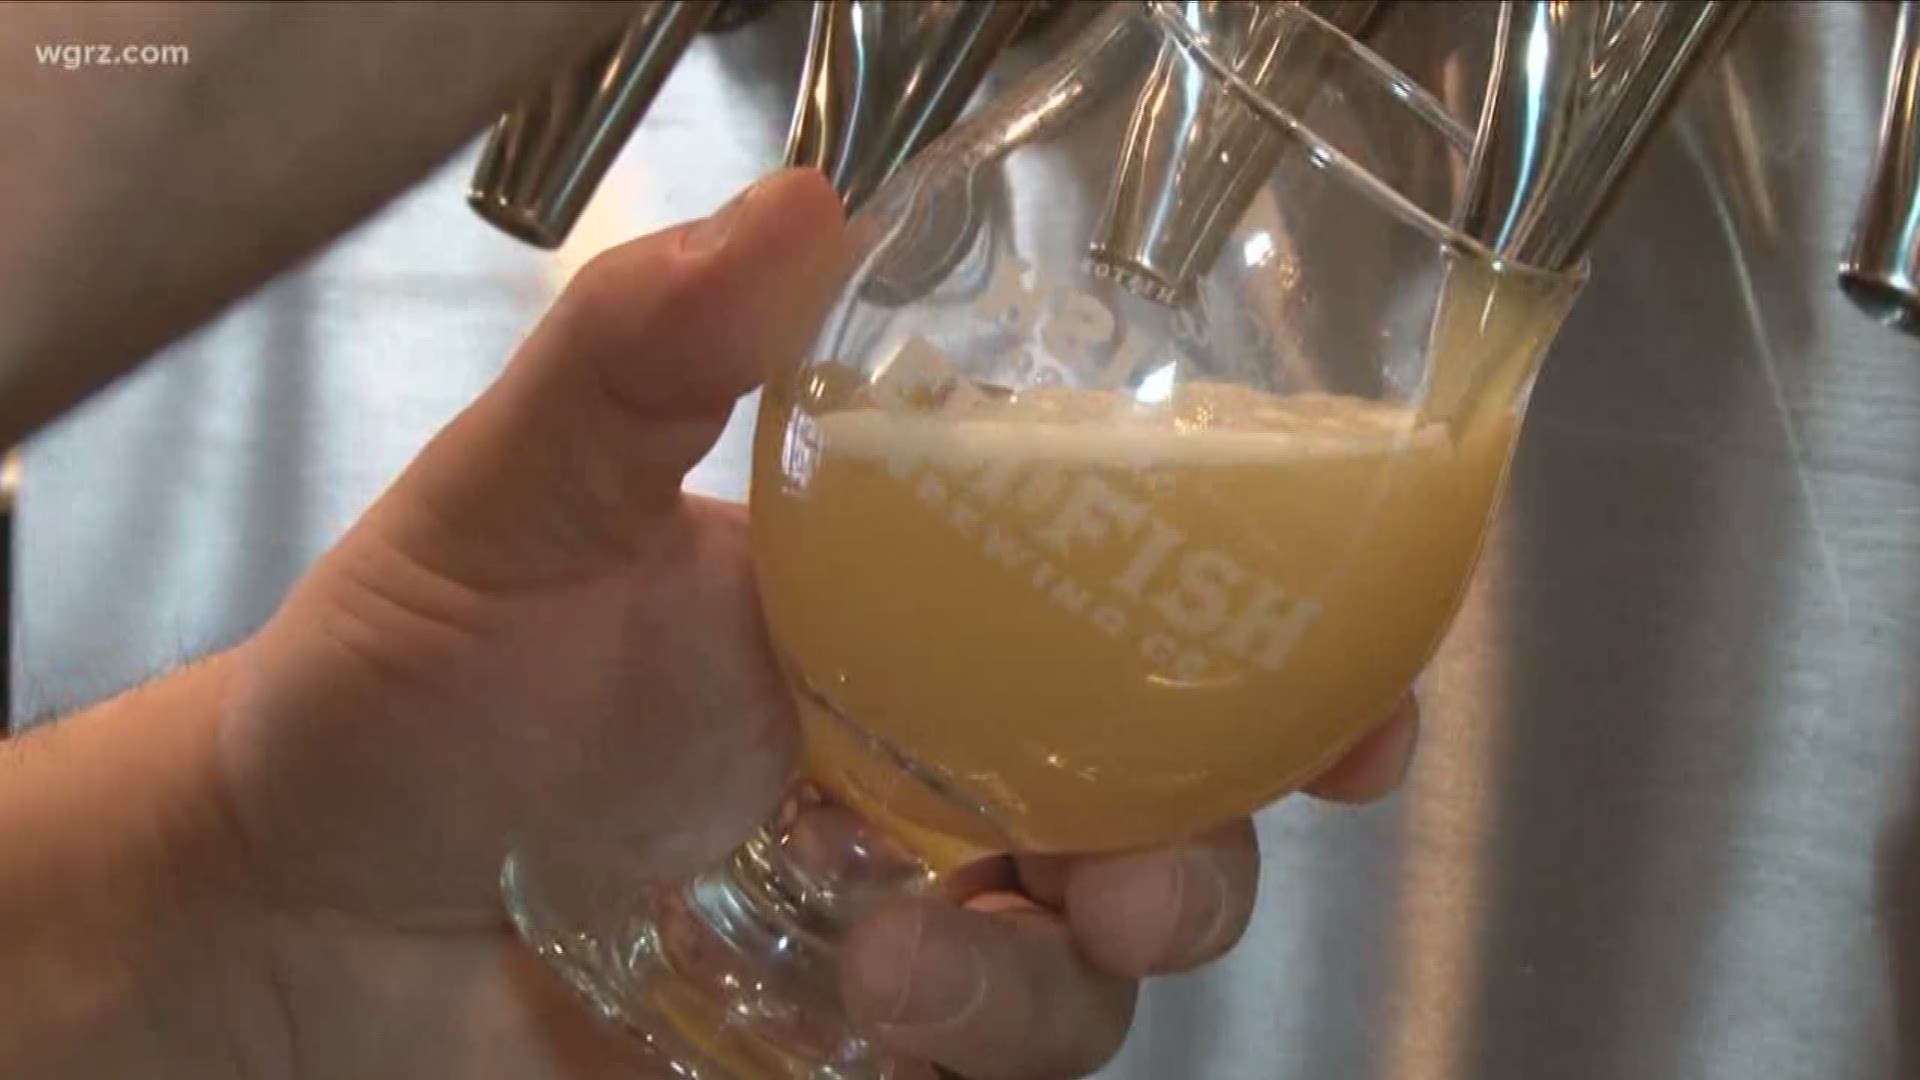 For the first time in more than a hundred years Batavia has a brewery. Daybreak's Stephanie Barnes is taking us to this newest spot along the city's main street in this week's Unique Eats.